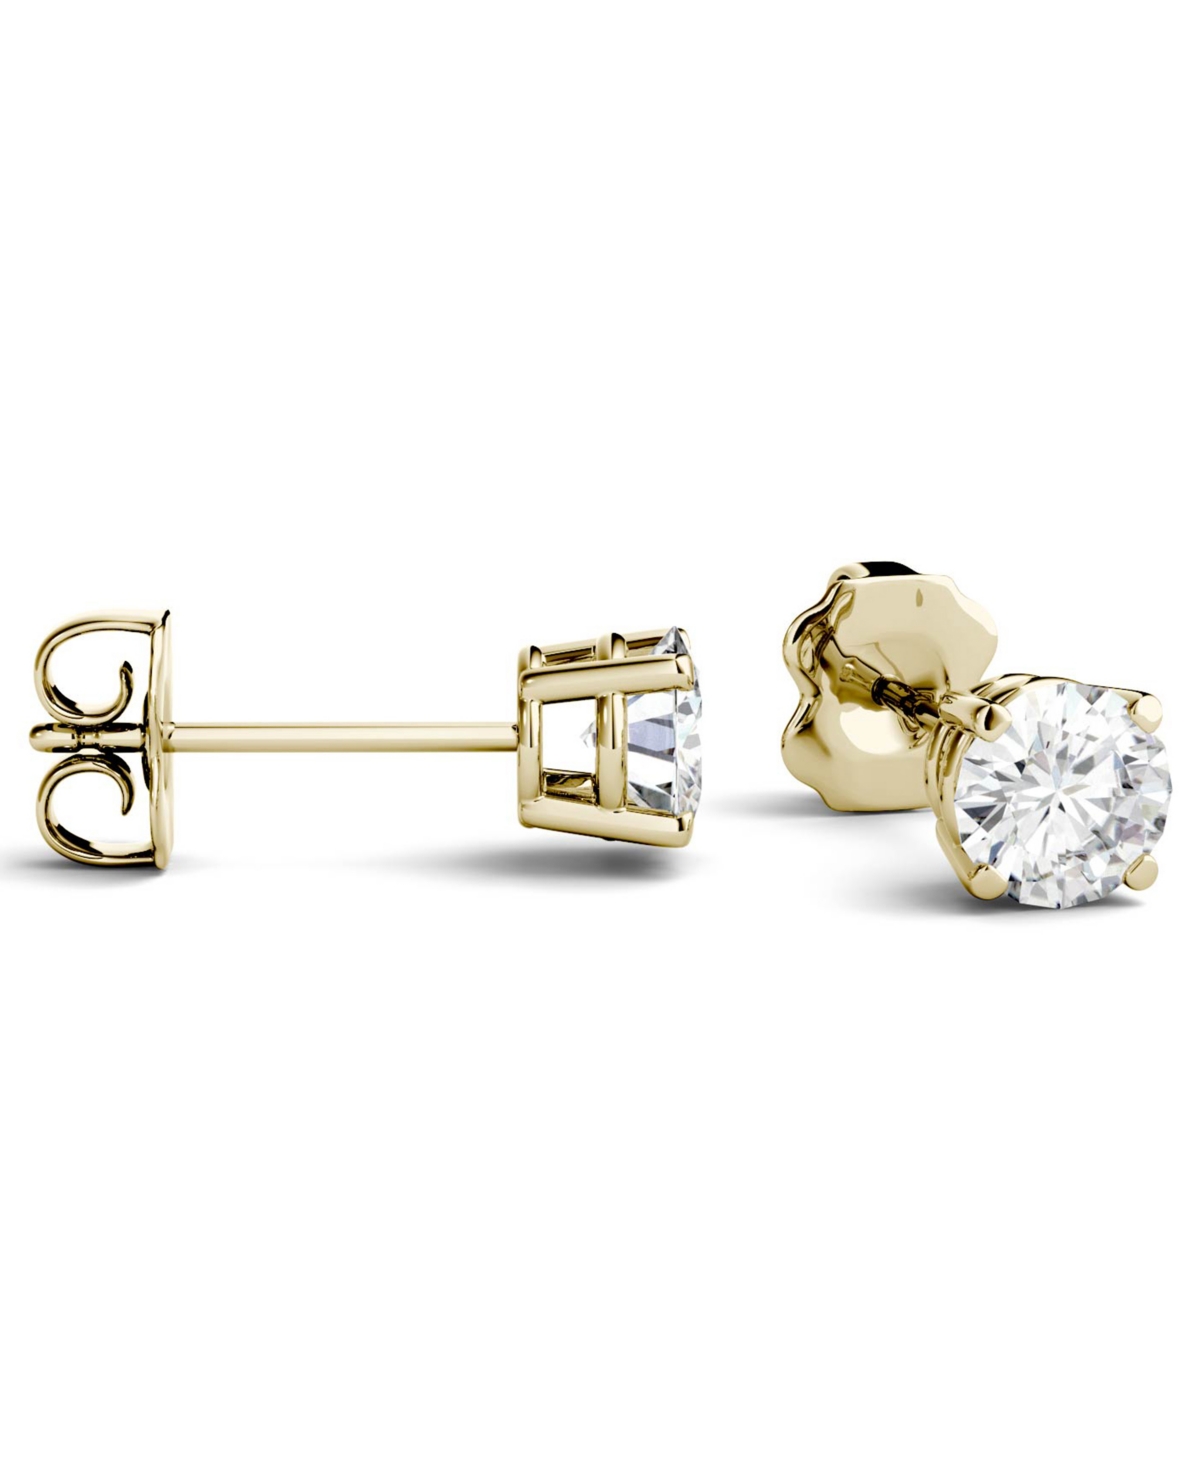 Moissanite Stud Earrings (1 ct. t.w. Diamond Equivalent) in 14k White or Yellow Gold - Gold